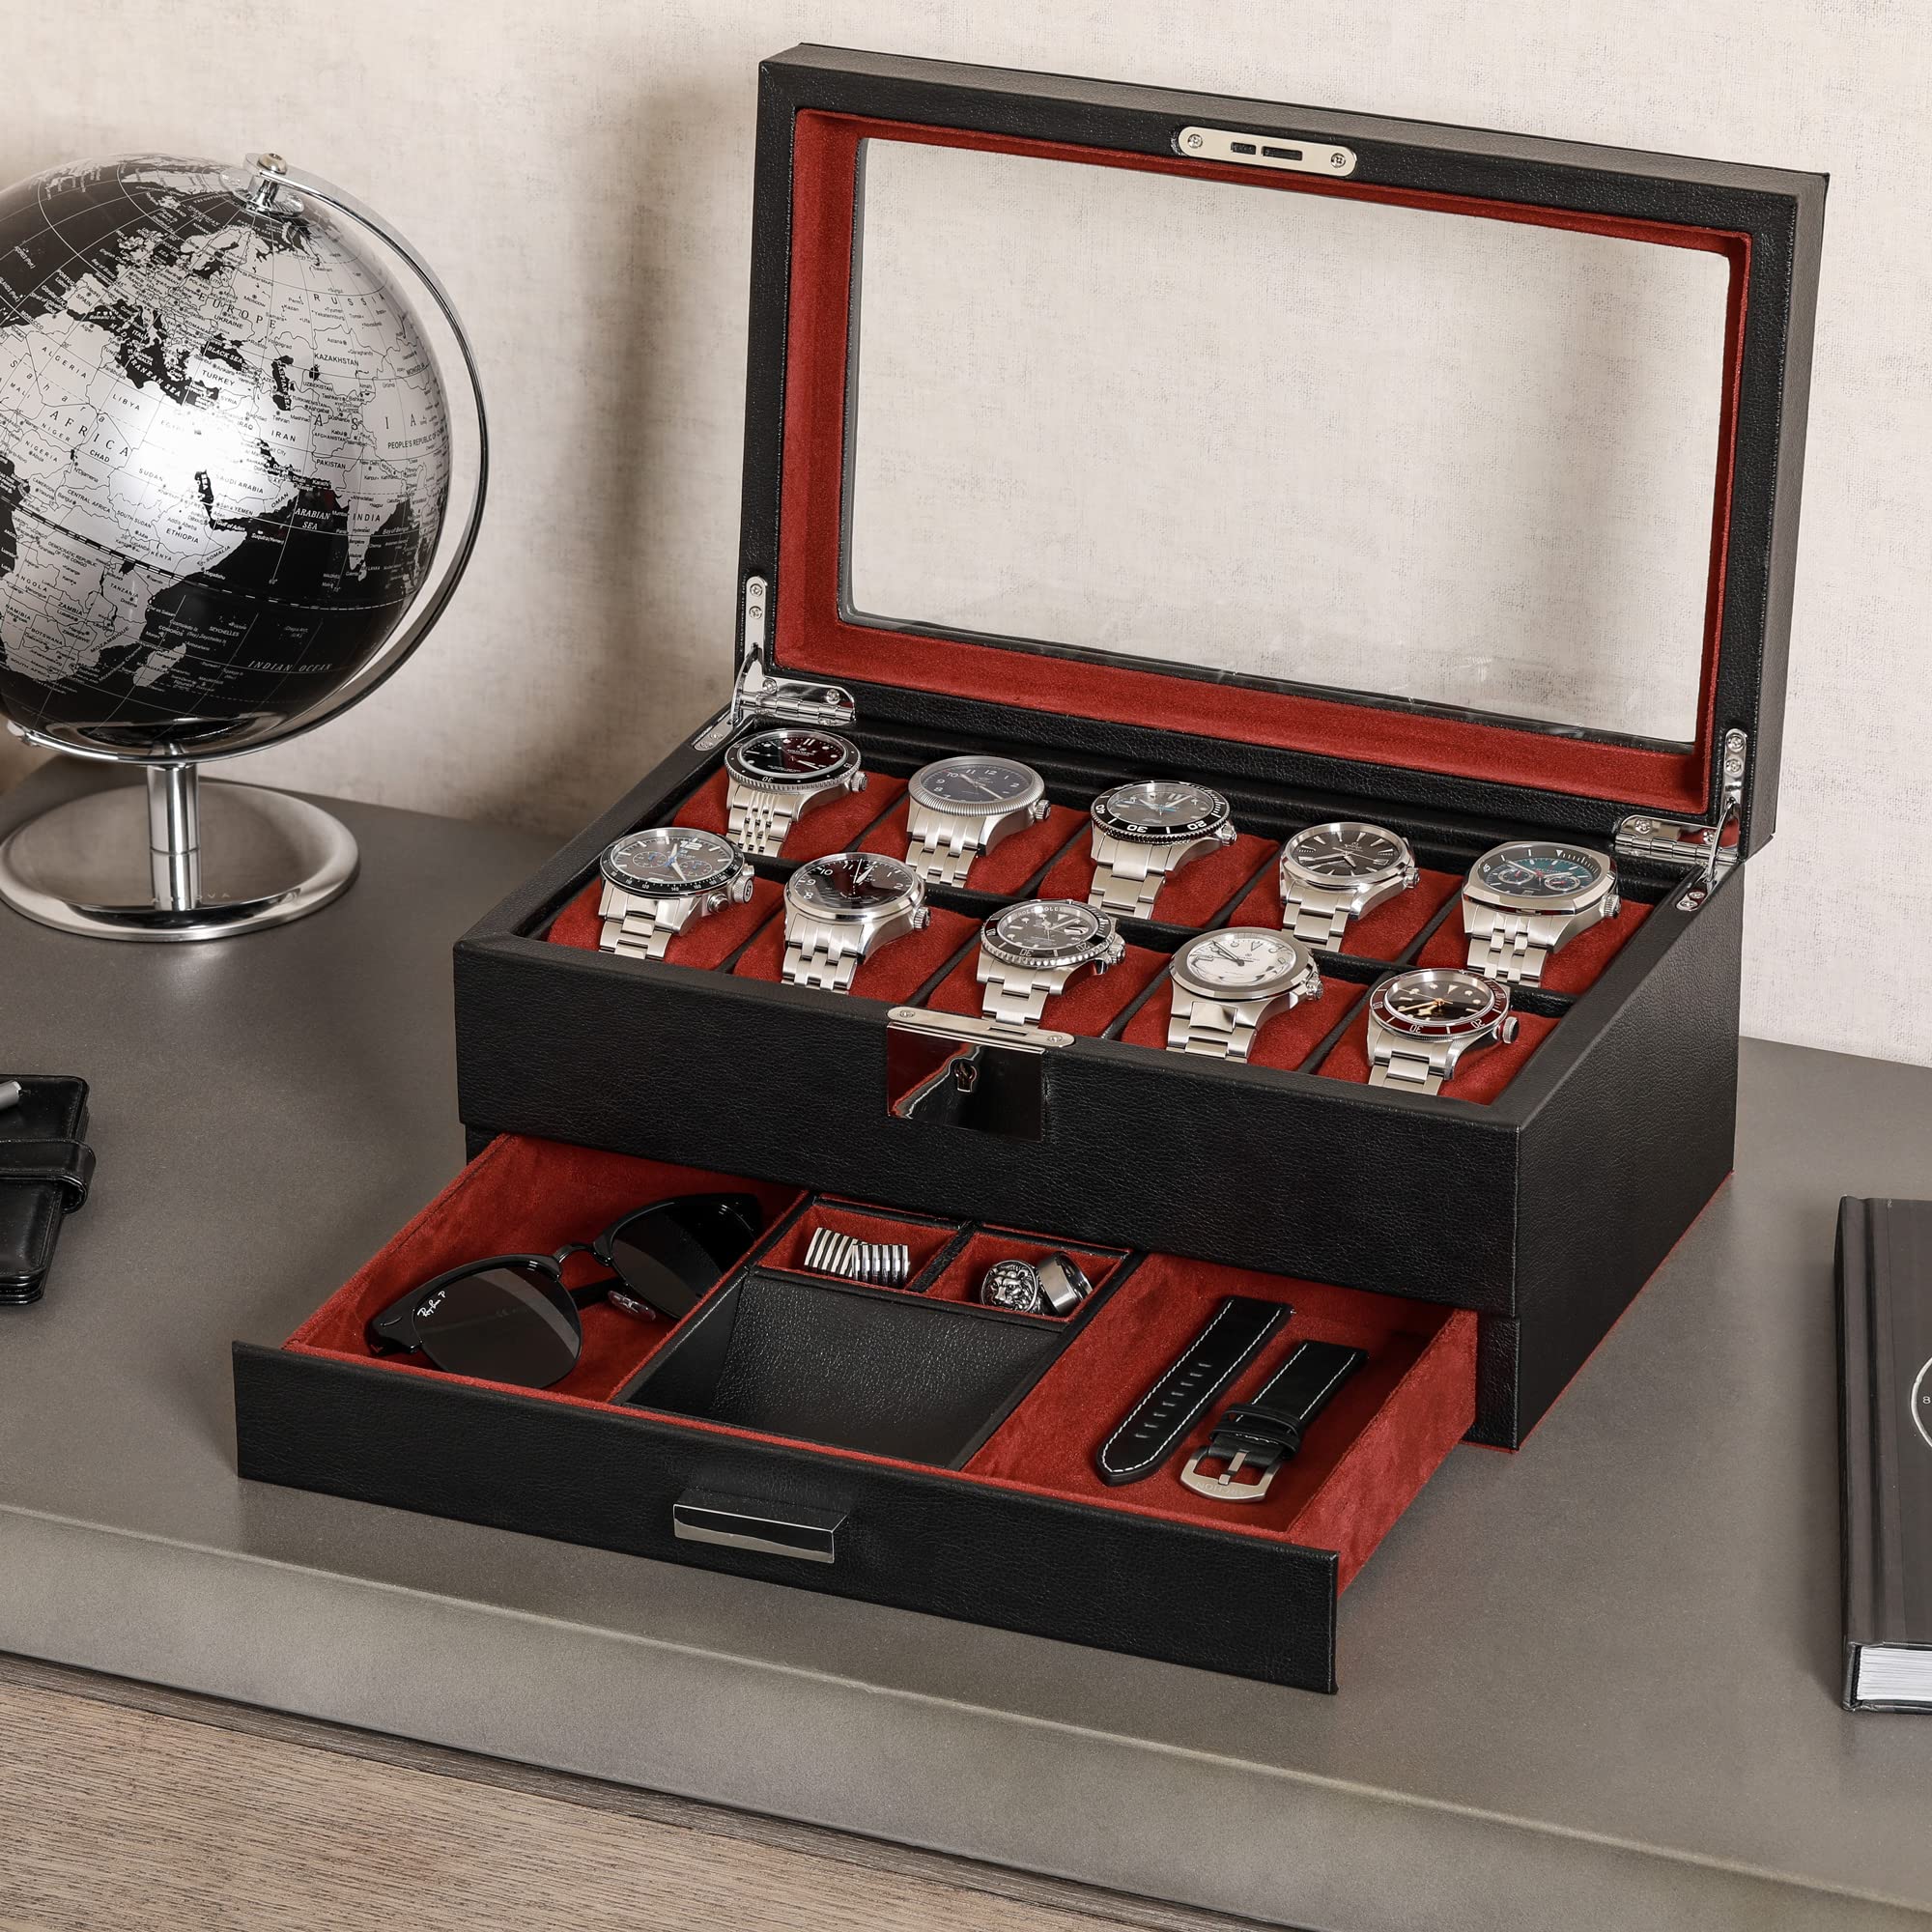 10 Slot Leather Watch Box with Matching 3 Slot Watch Roll - Luxury Watch Case Display Organizer Microsuede Liner, Locking Mens Jewelry Watches Holder, Men's Storage Boxes Holder Glass Top Black/Red